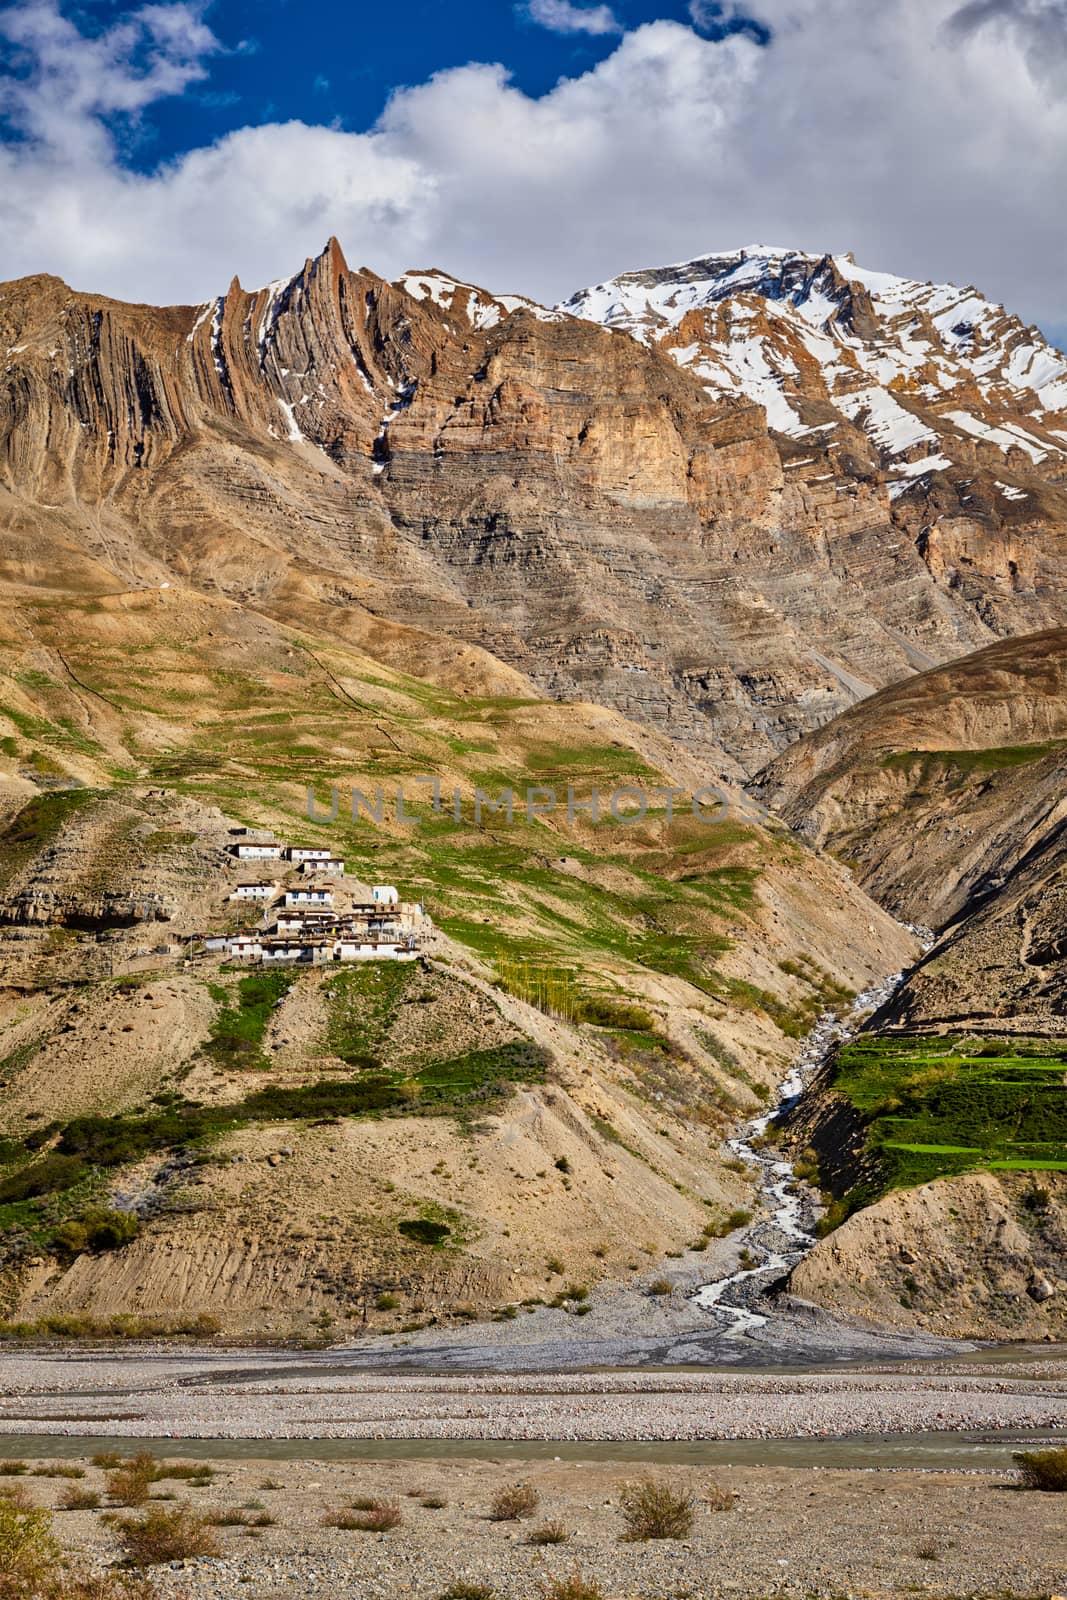 Village in Himalayas by dimol